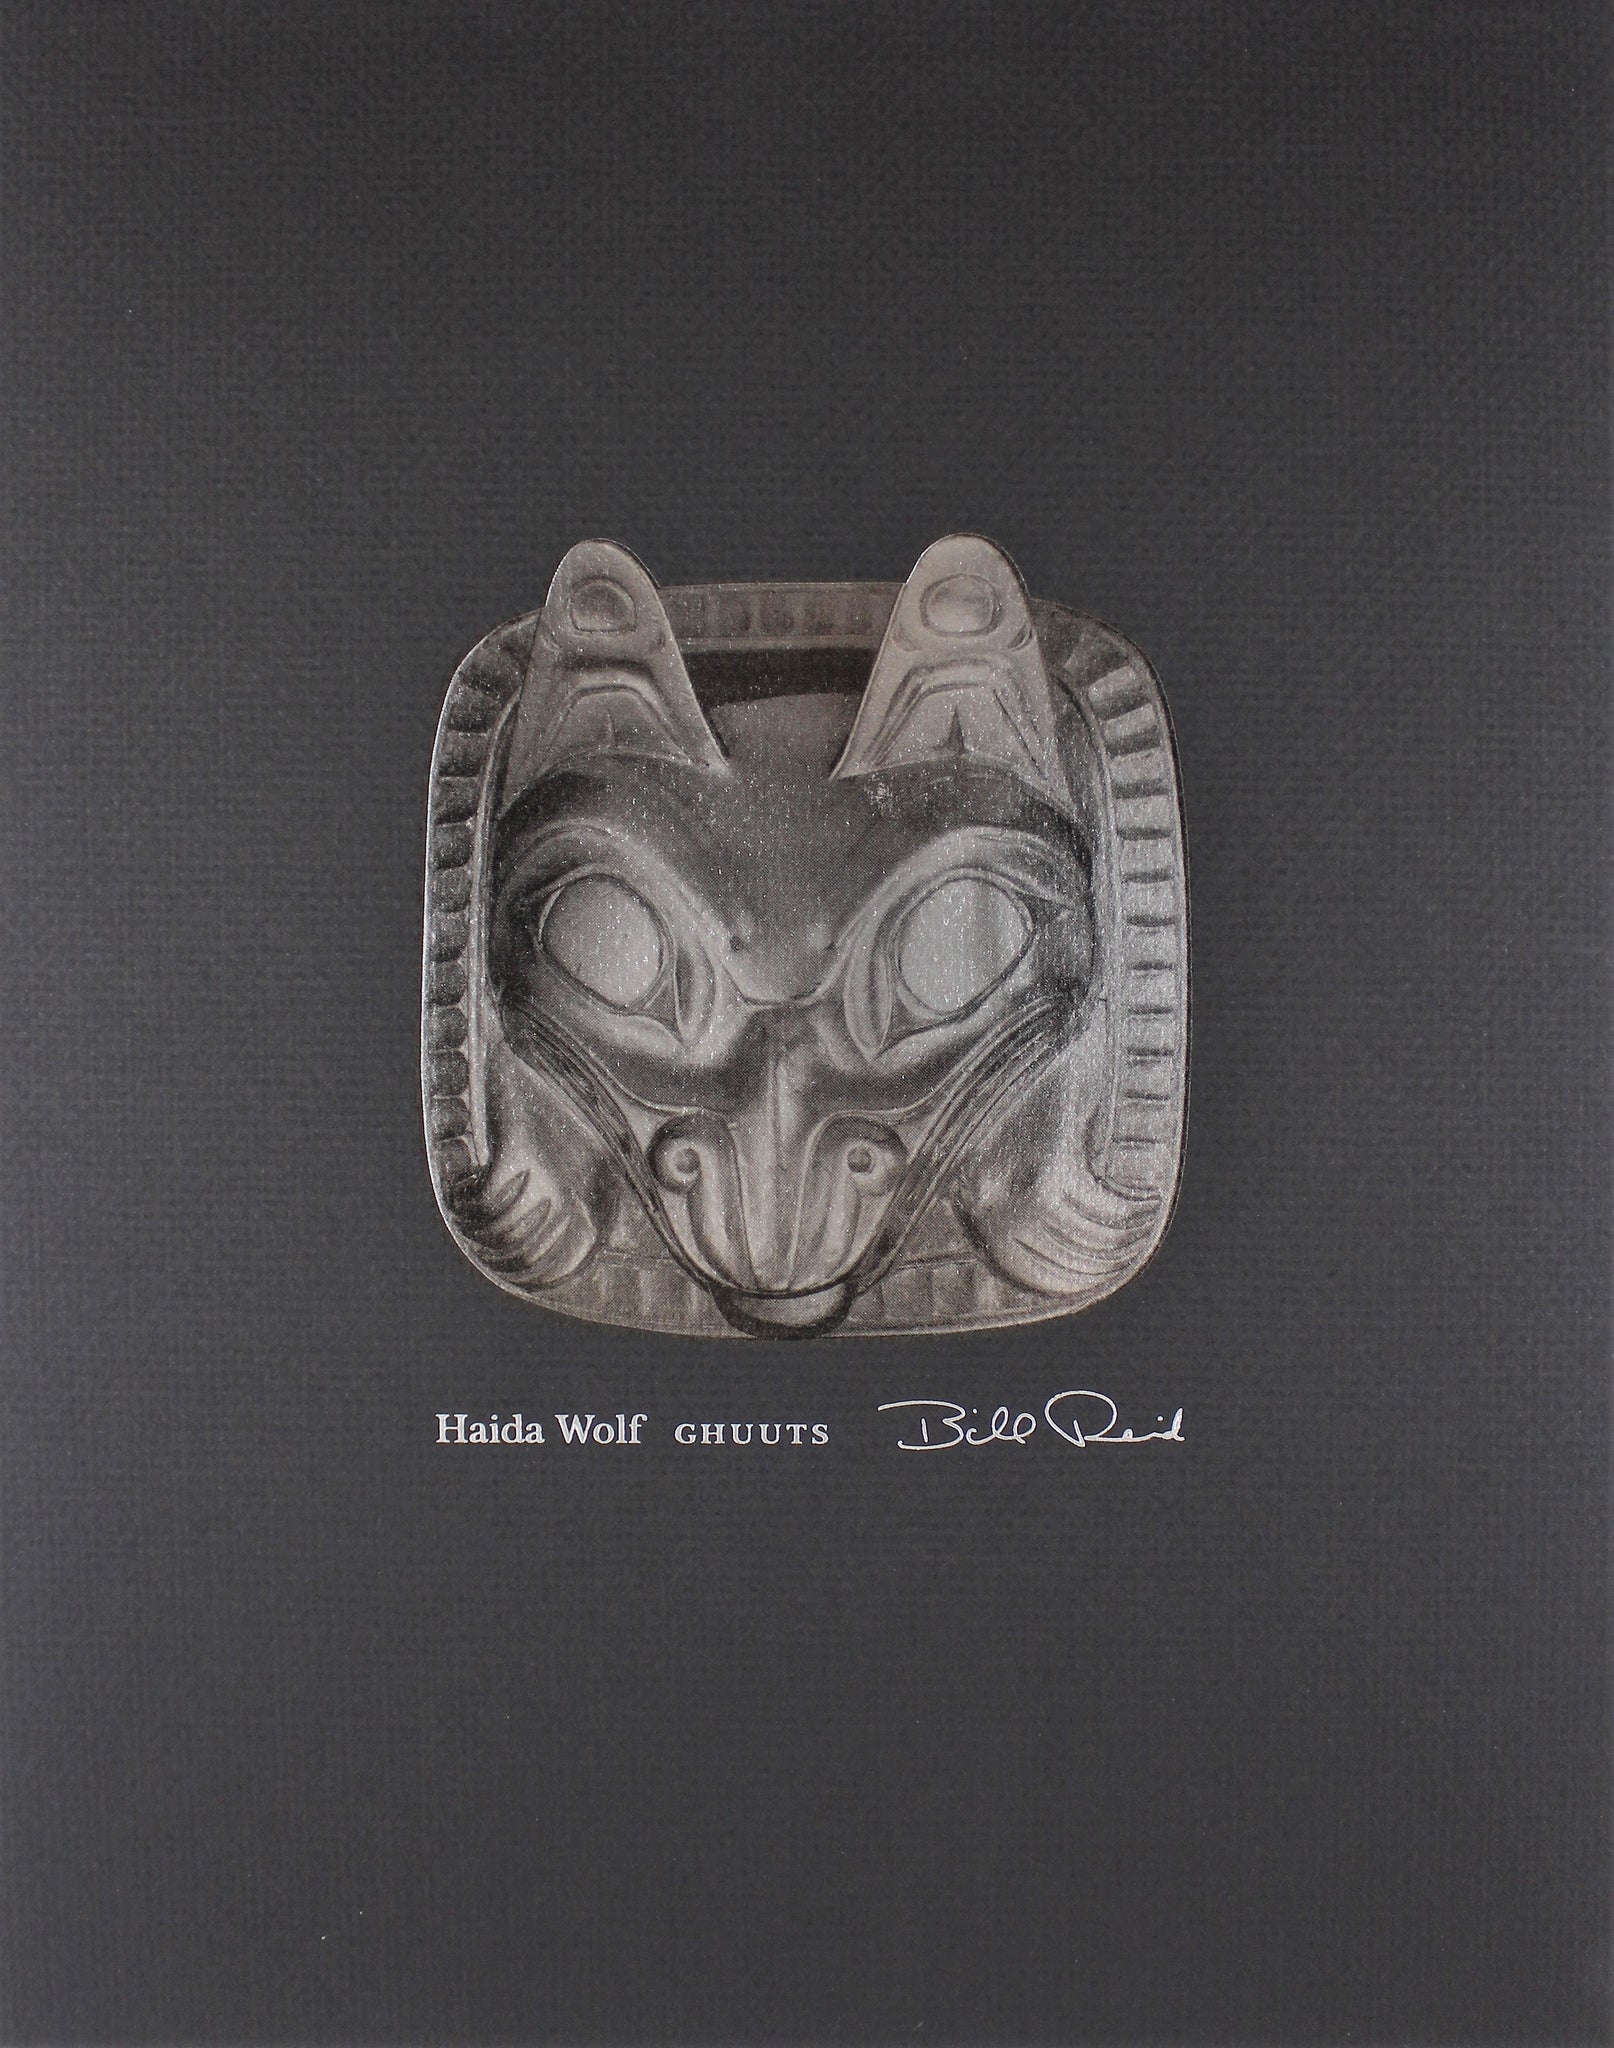 Haida Wolf ‘Ghuuts’, Special Edition Embossed Silver Leaf Print